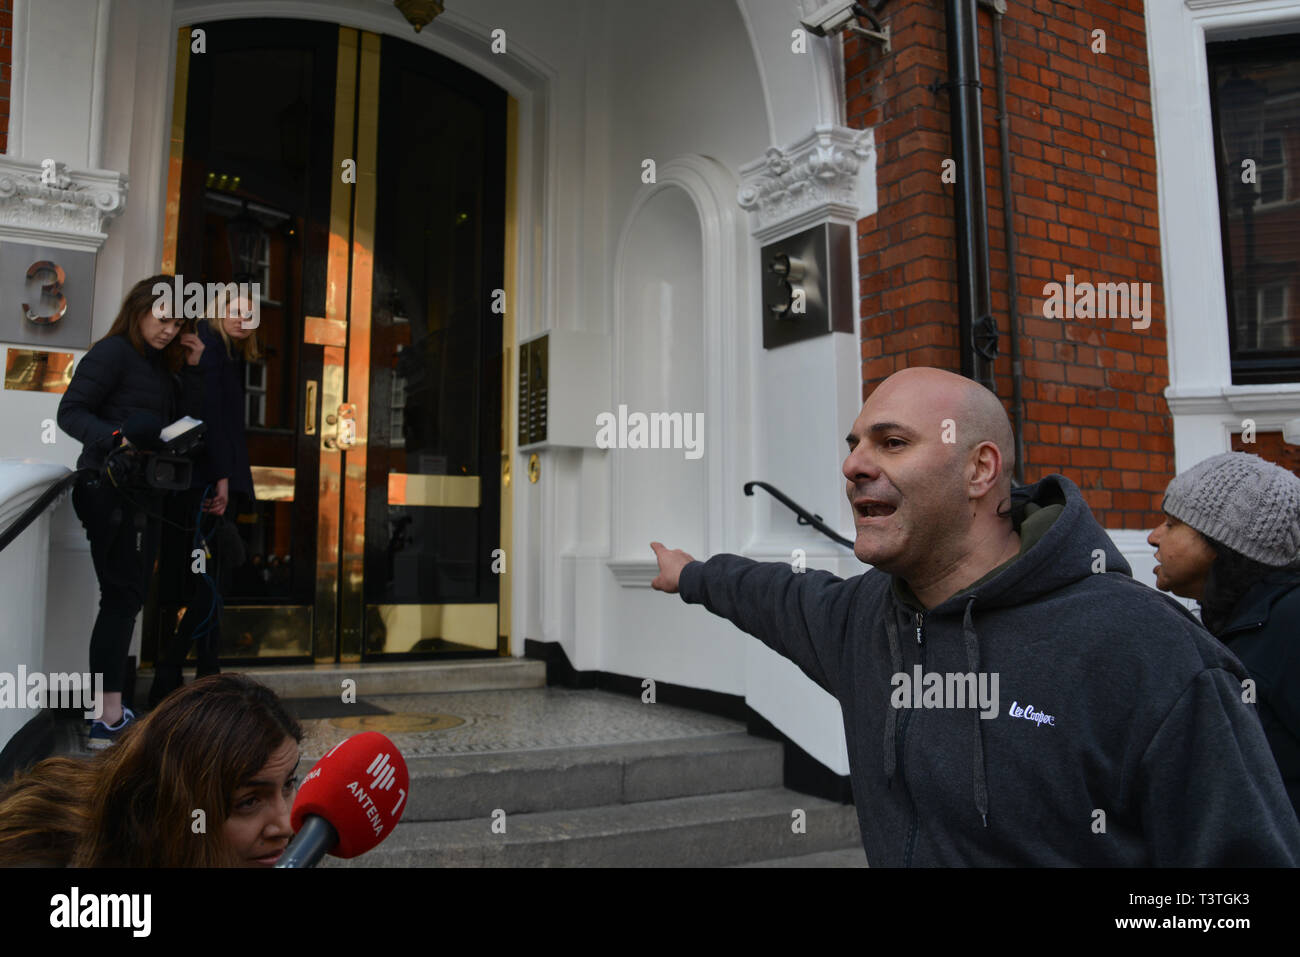 A 'Free Speech' activist and  journalist is interviewed at the entrance to the Embassy Of Ecuador in London, shortly after the WikiLeaks founder Julian Assange was removed from the embassy and arrested by the British Police. Stock Photo